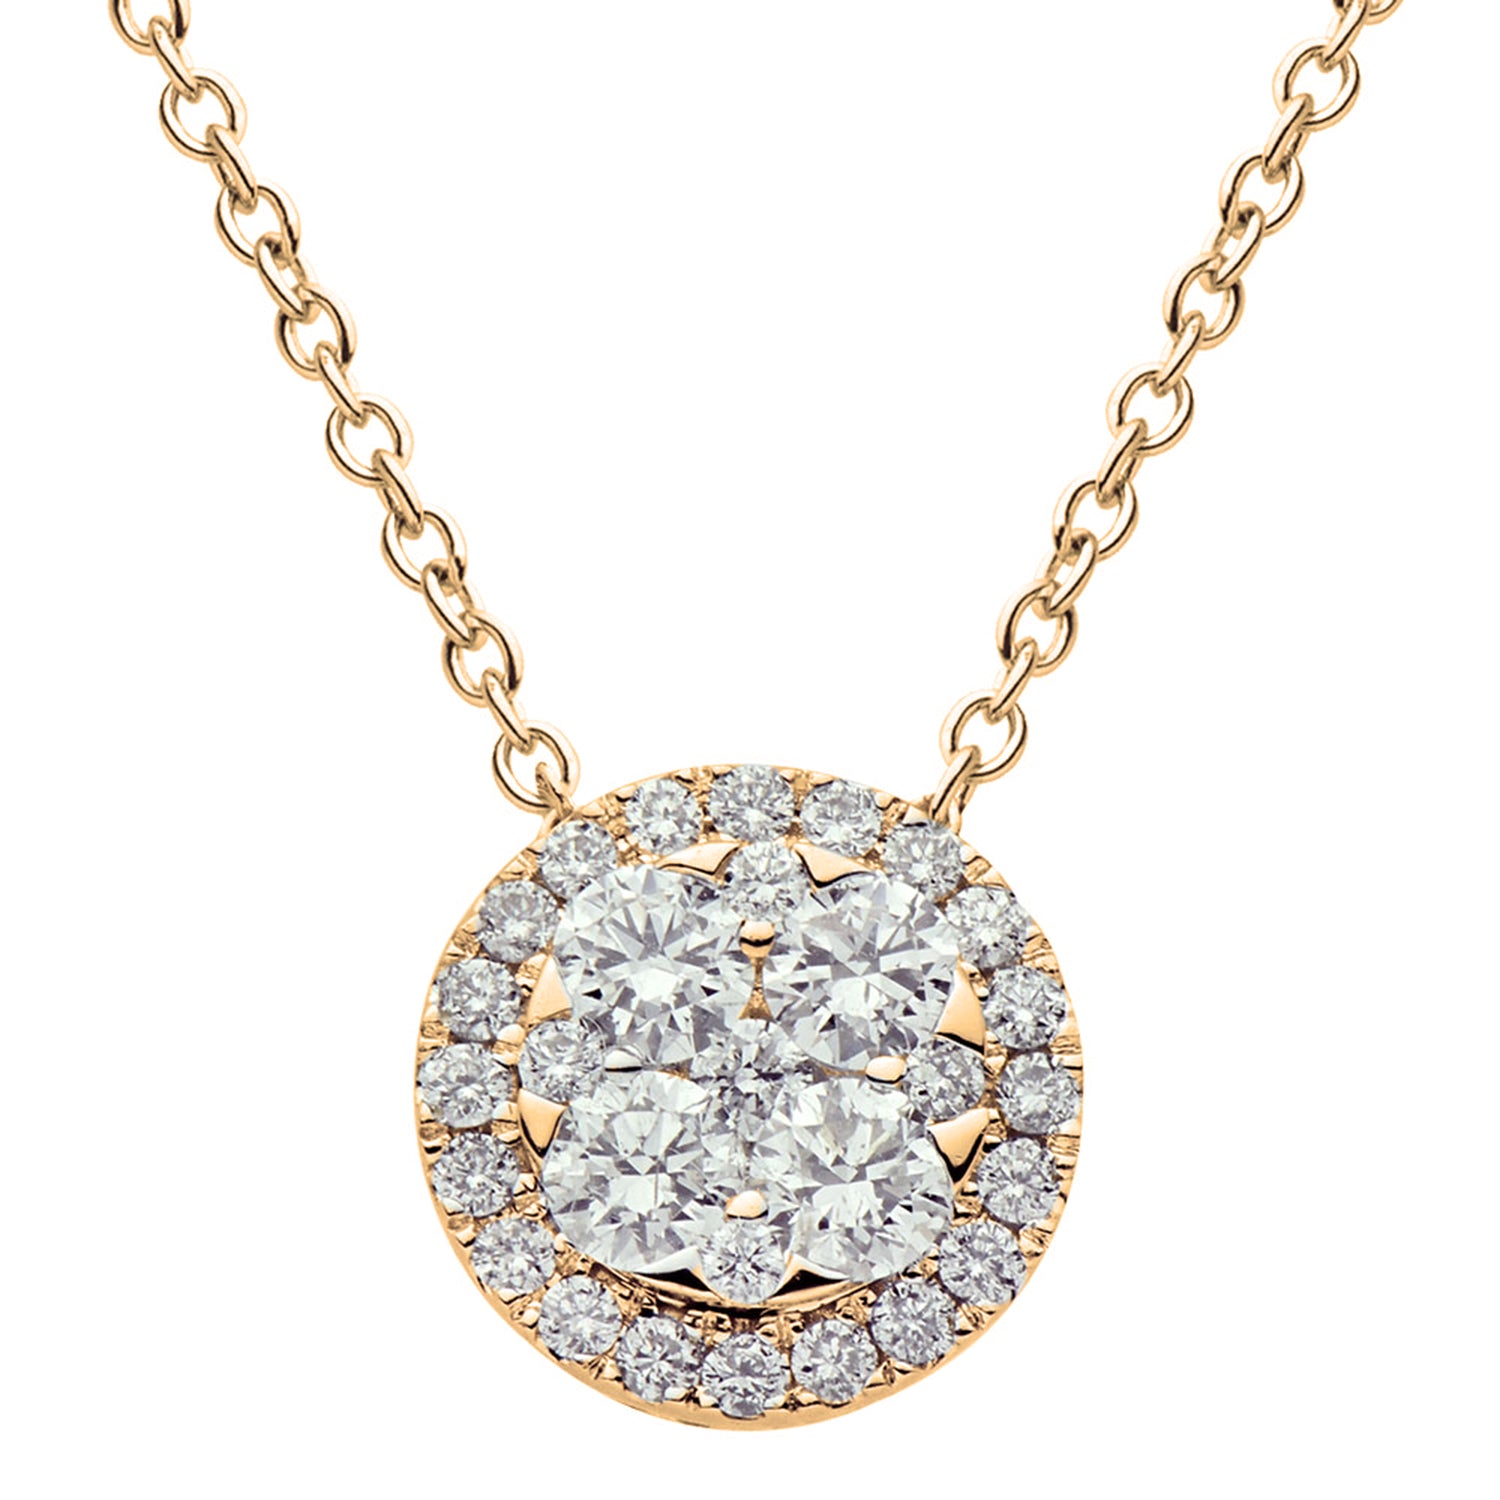 Pendant 18KY/1.1G 4RD-0.54CT 29RD-0.20CT 1.5CT-SIZE W/CHAIN